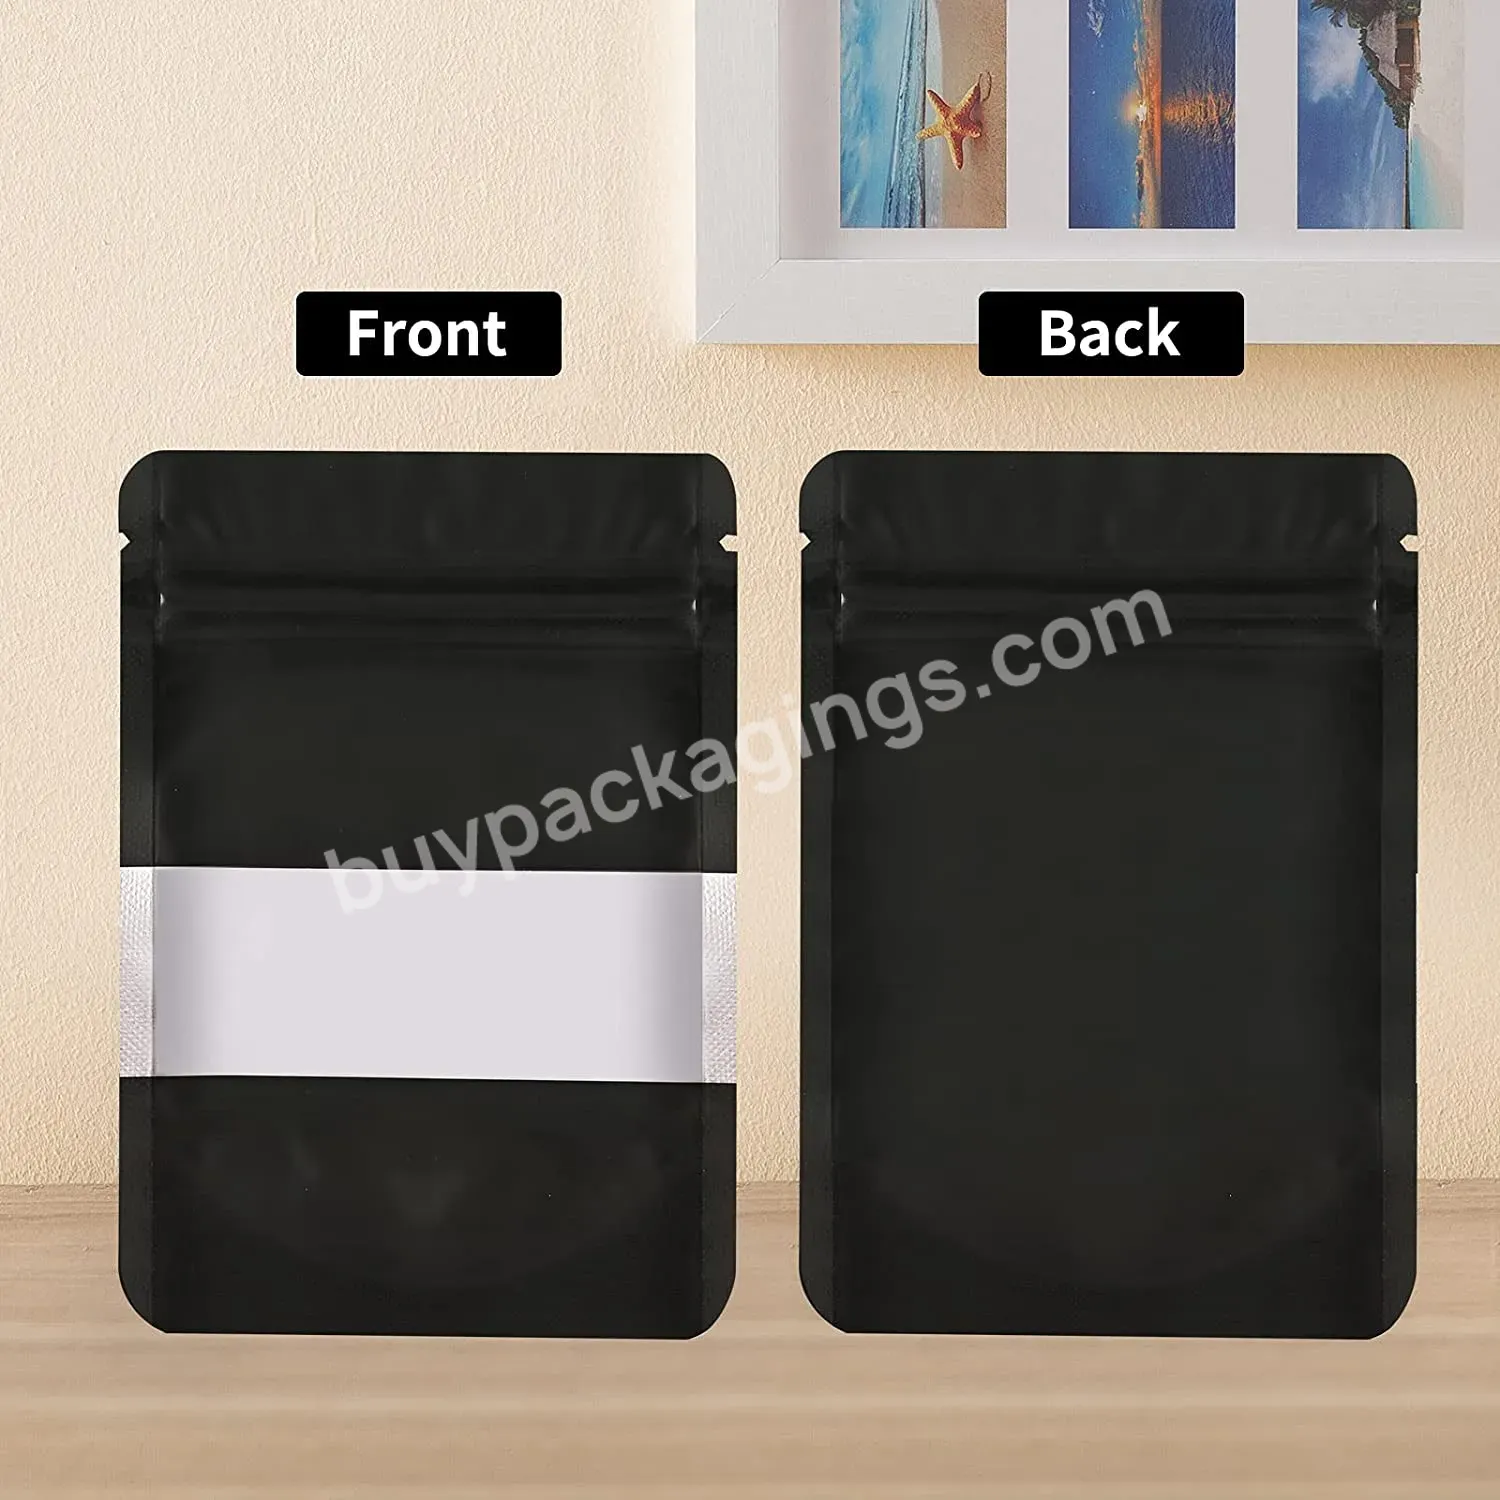 Newest Digital Printing Soft Touch Smellproof Bag Child Safety Proof Resistant Ziplock Packaging Mylar Pouch - Buy Newest Digital Printing Soft Touch Smellproof Bag,Child Safety Proof Zipper Bags,Ziplock Packaging Mylar Pouch.